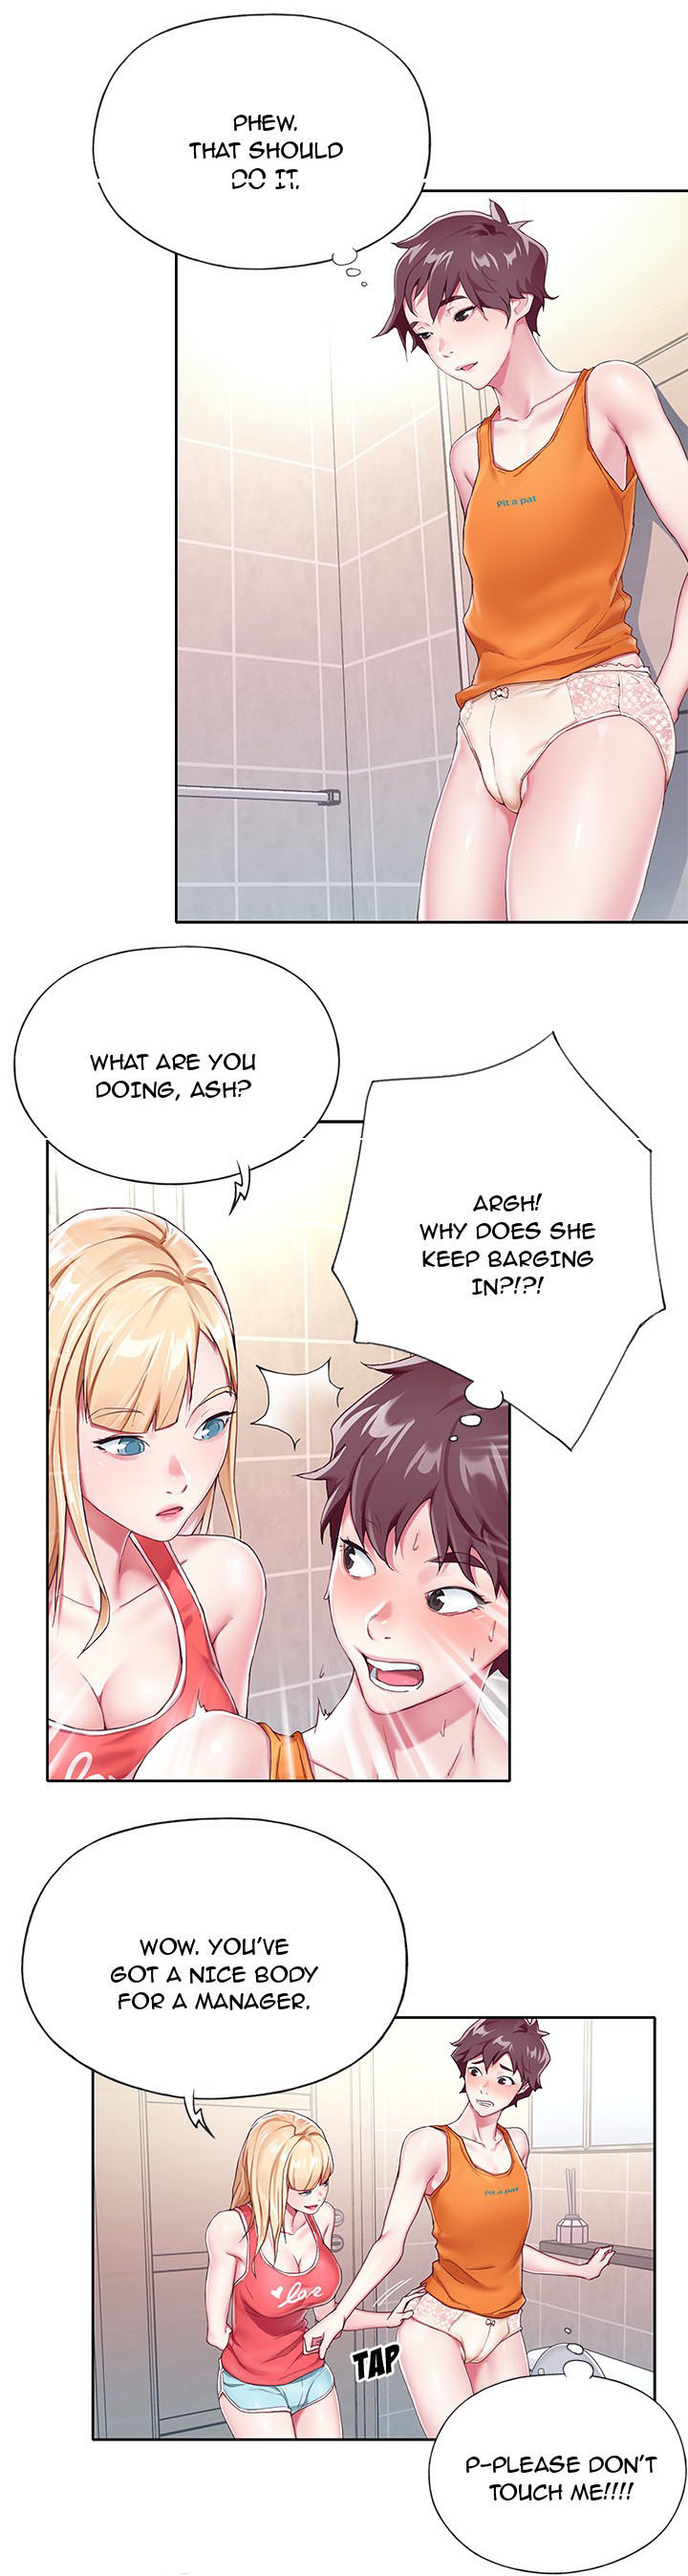 [Viagra, Beck] The Idol Project Ch.4/? [English] [Hentai Universe]